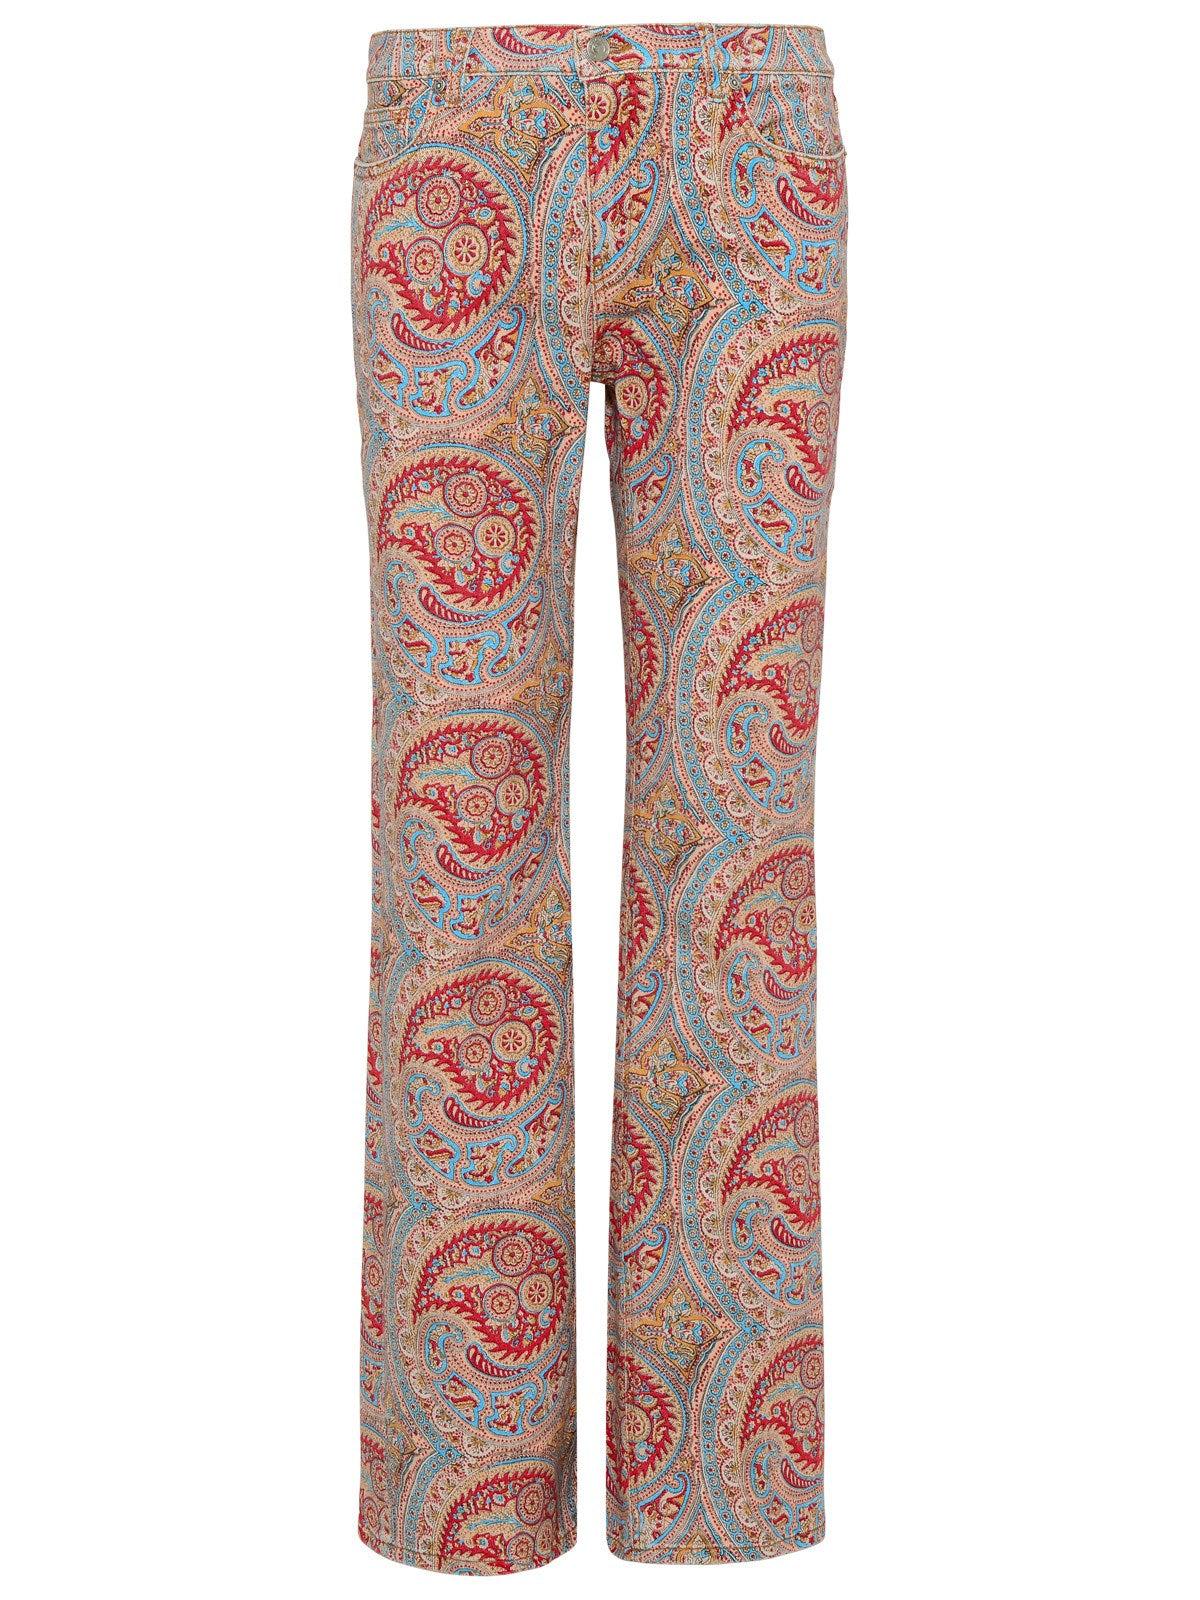 Etro Paisley Printed High-rise Jeans